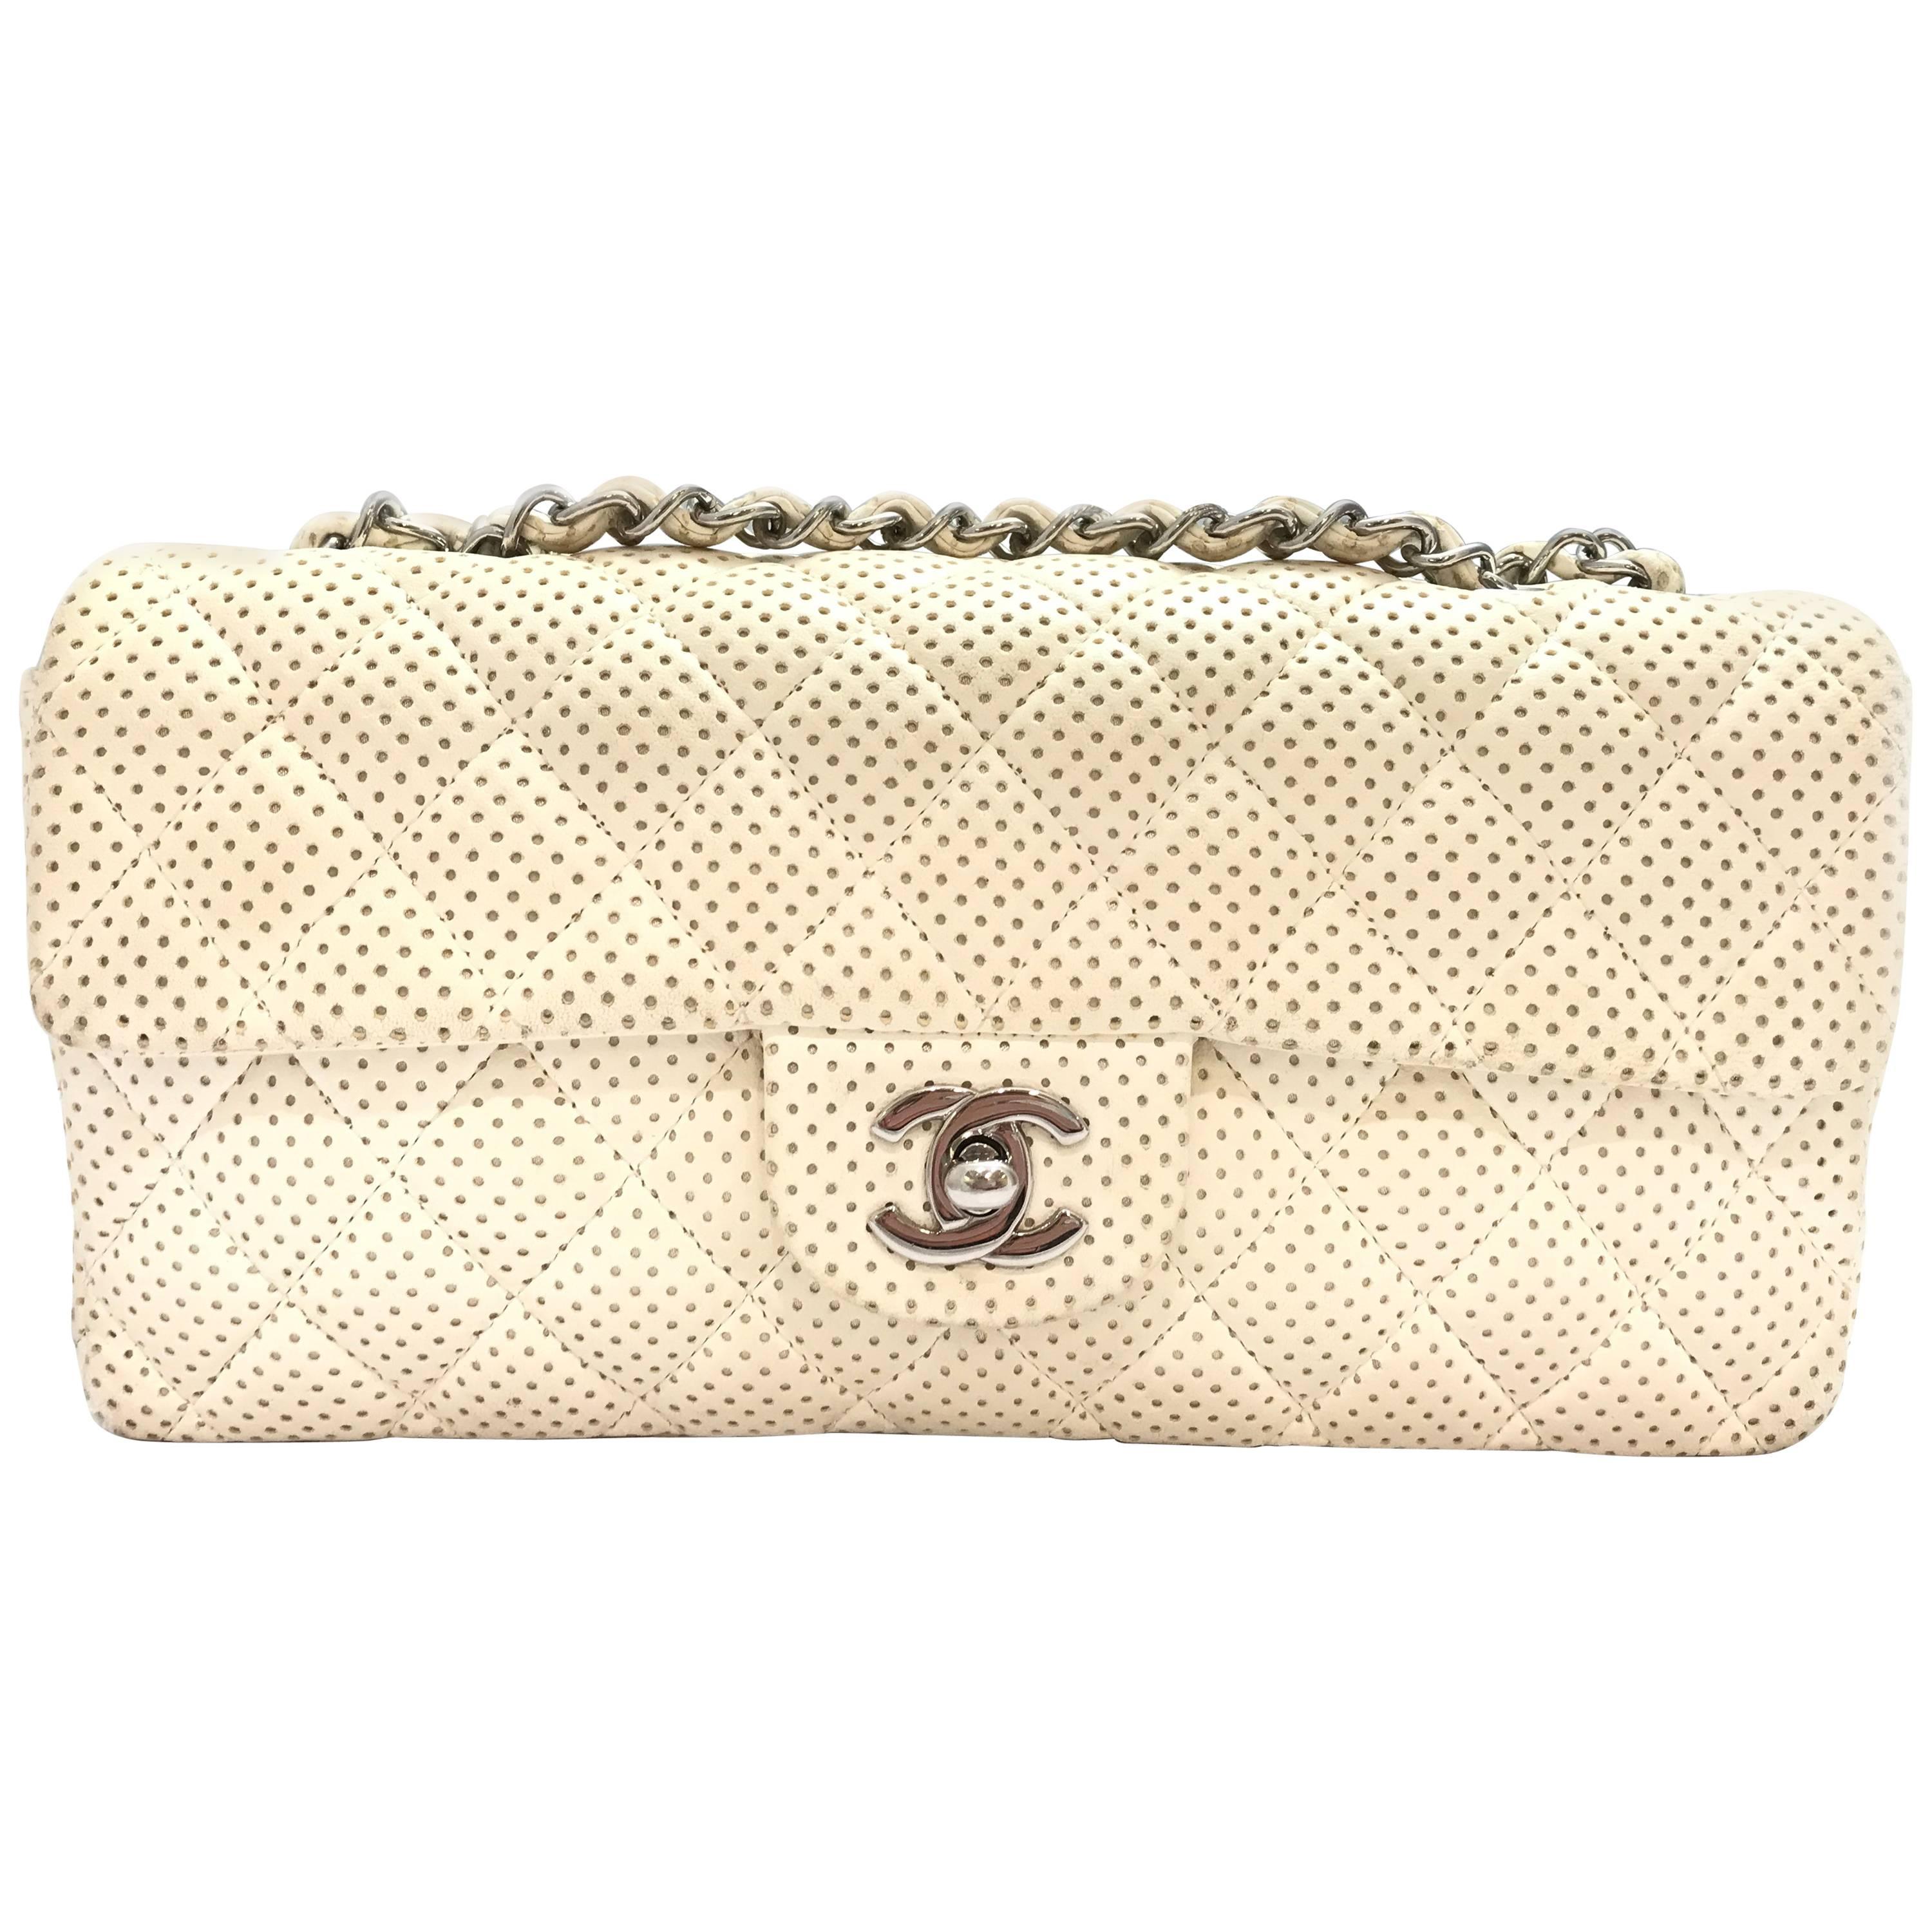 Chanel White Quilting Lambskin Leather Shoulder Tote Bag For Sale